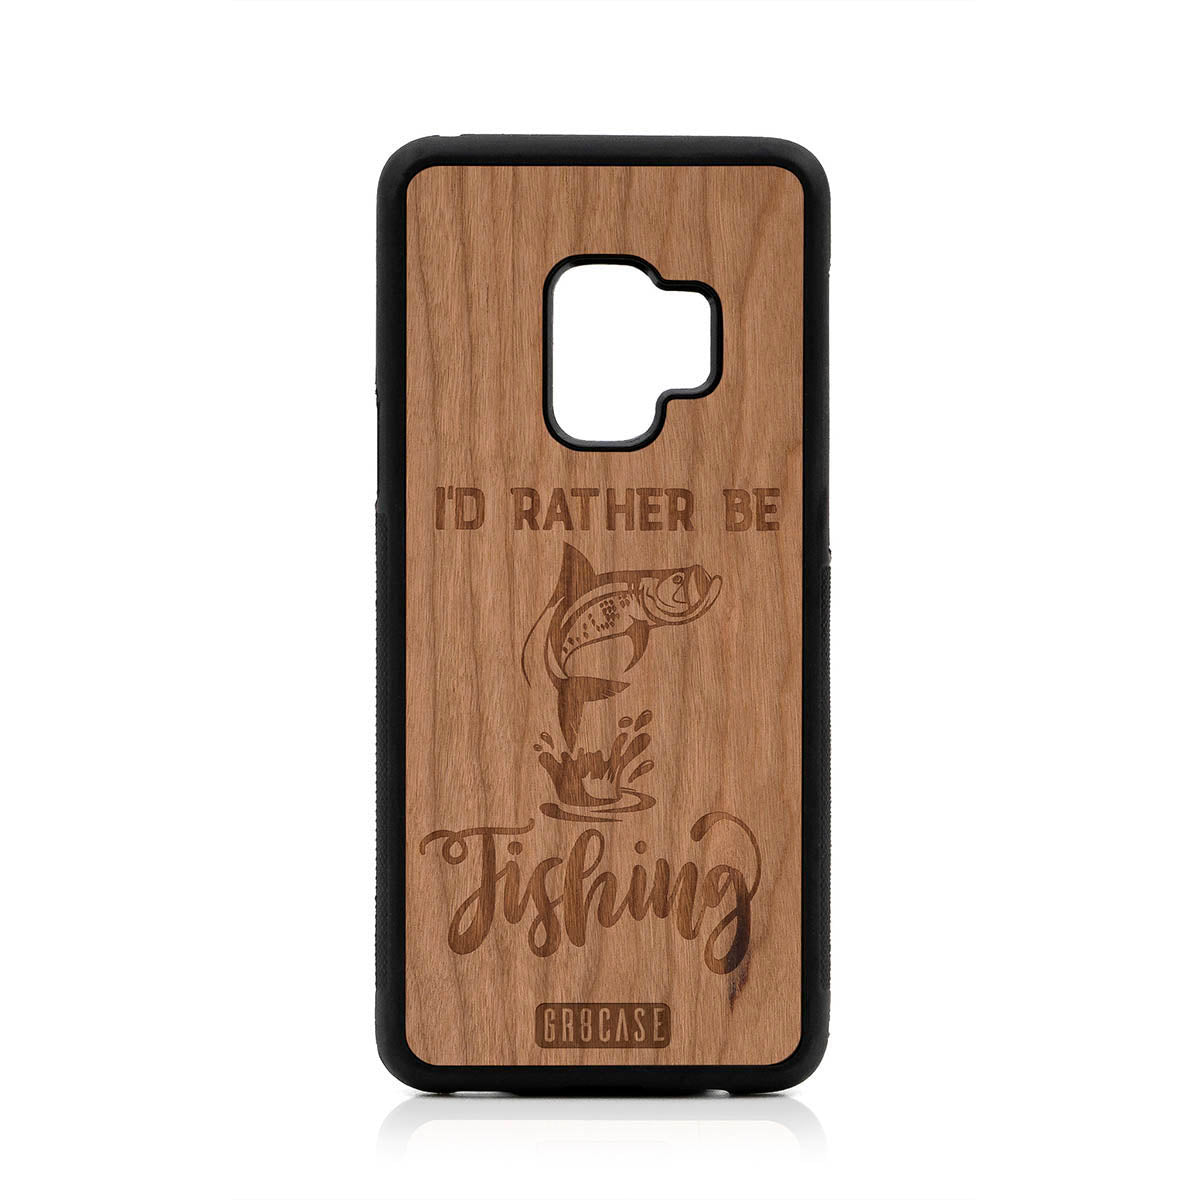 I'D Rather Be Fishing Design Wood Case For Samsung Galaxy S9